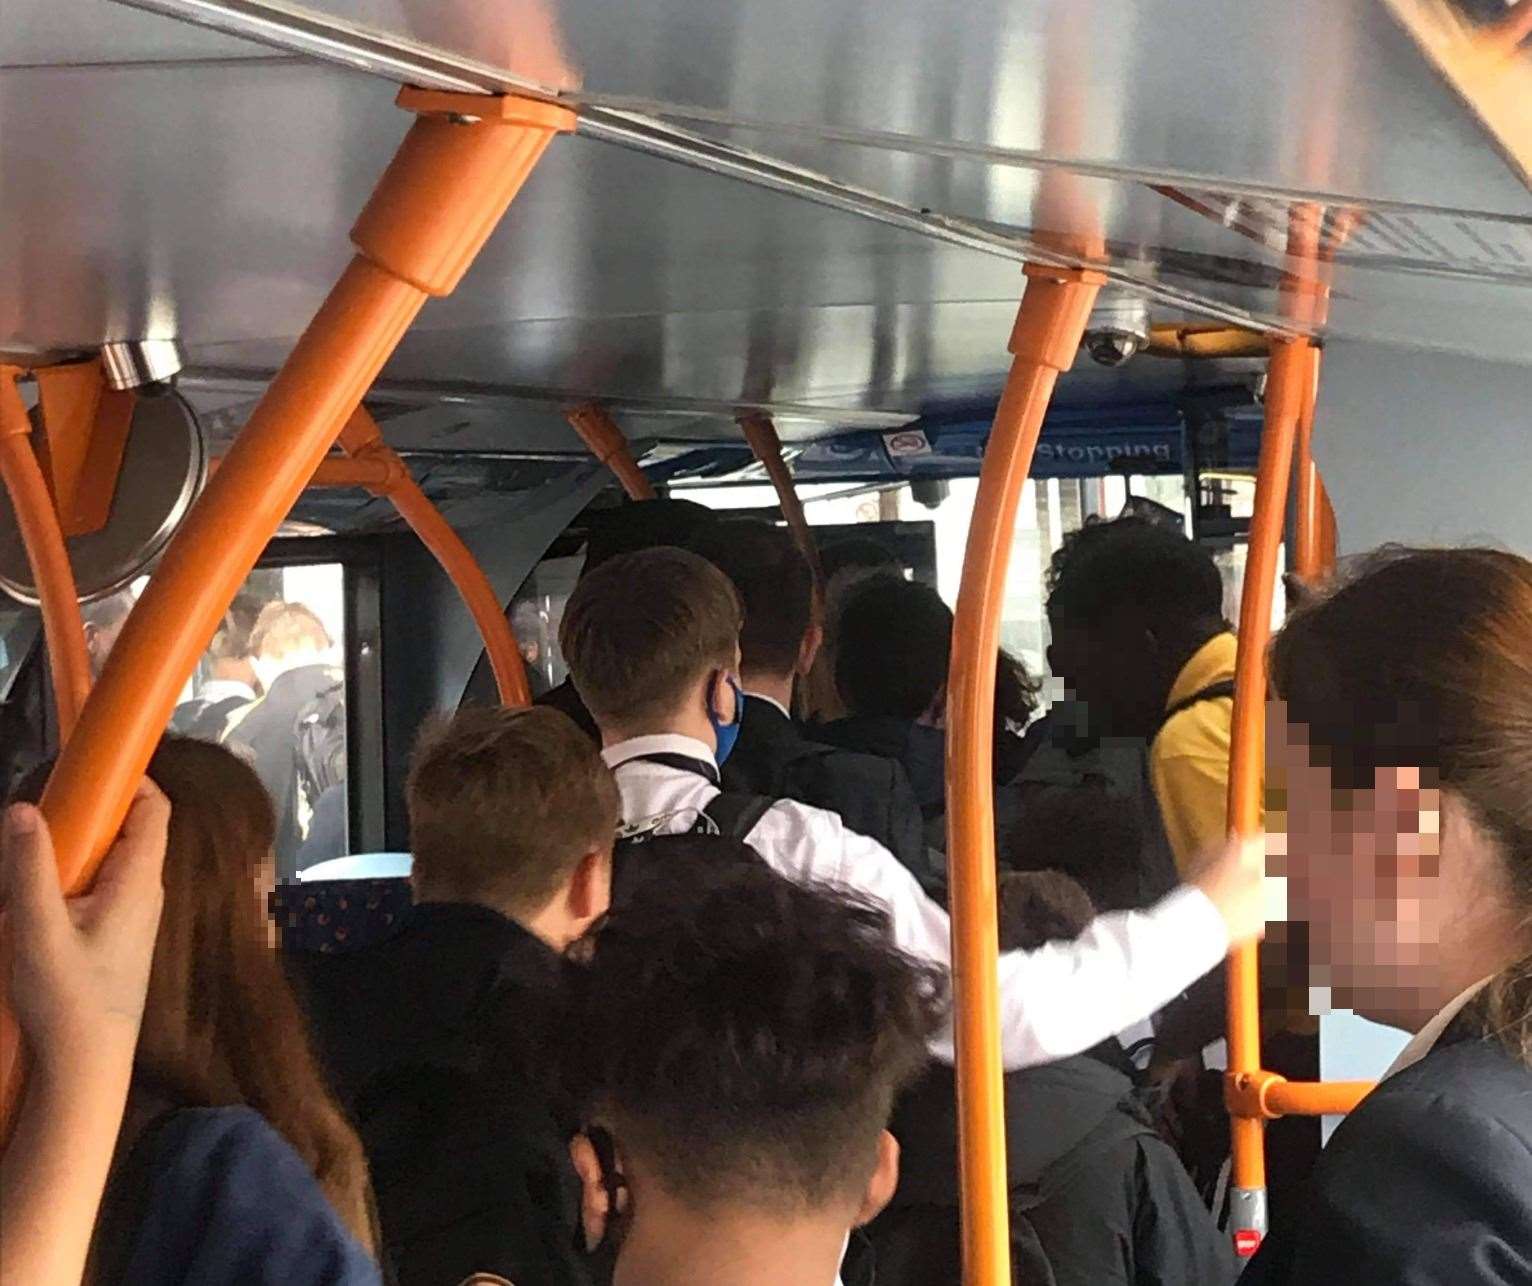 School pupils crowding to leave the bus in the afternoon